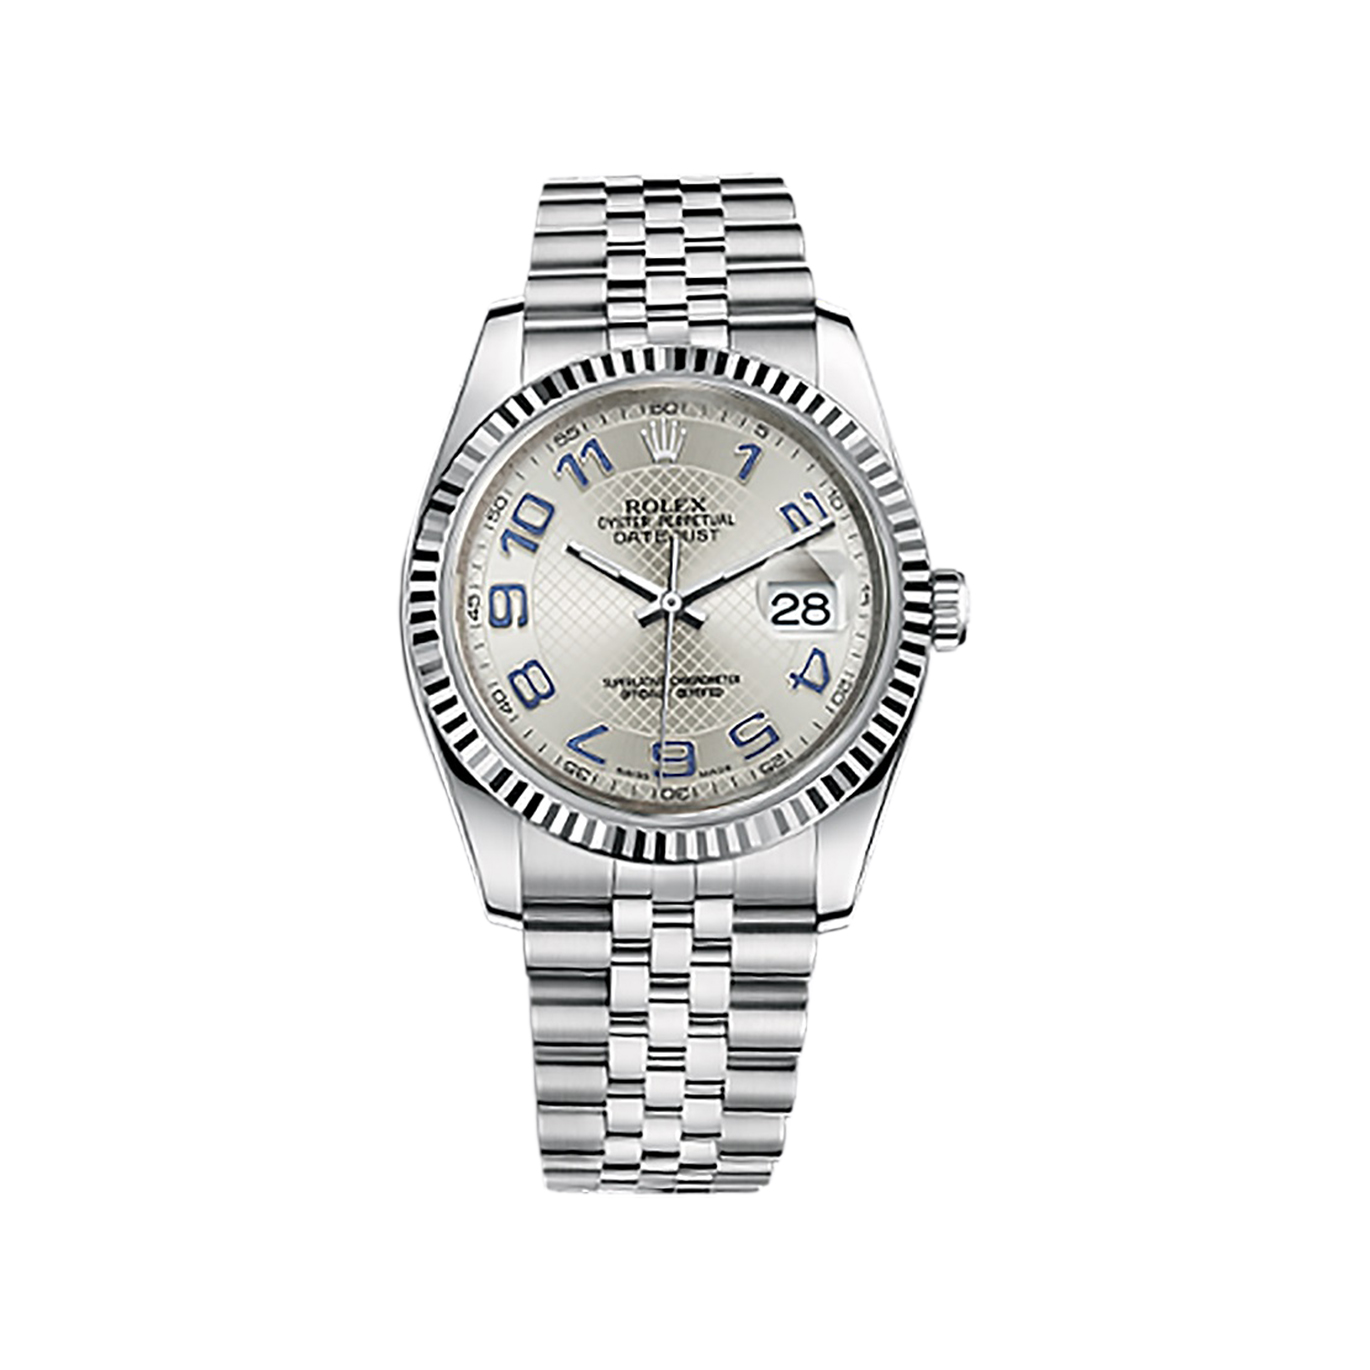 Datejust 36 116234 White Gold & Stainless Steel Watch (Silver) - Click Image to Close